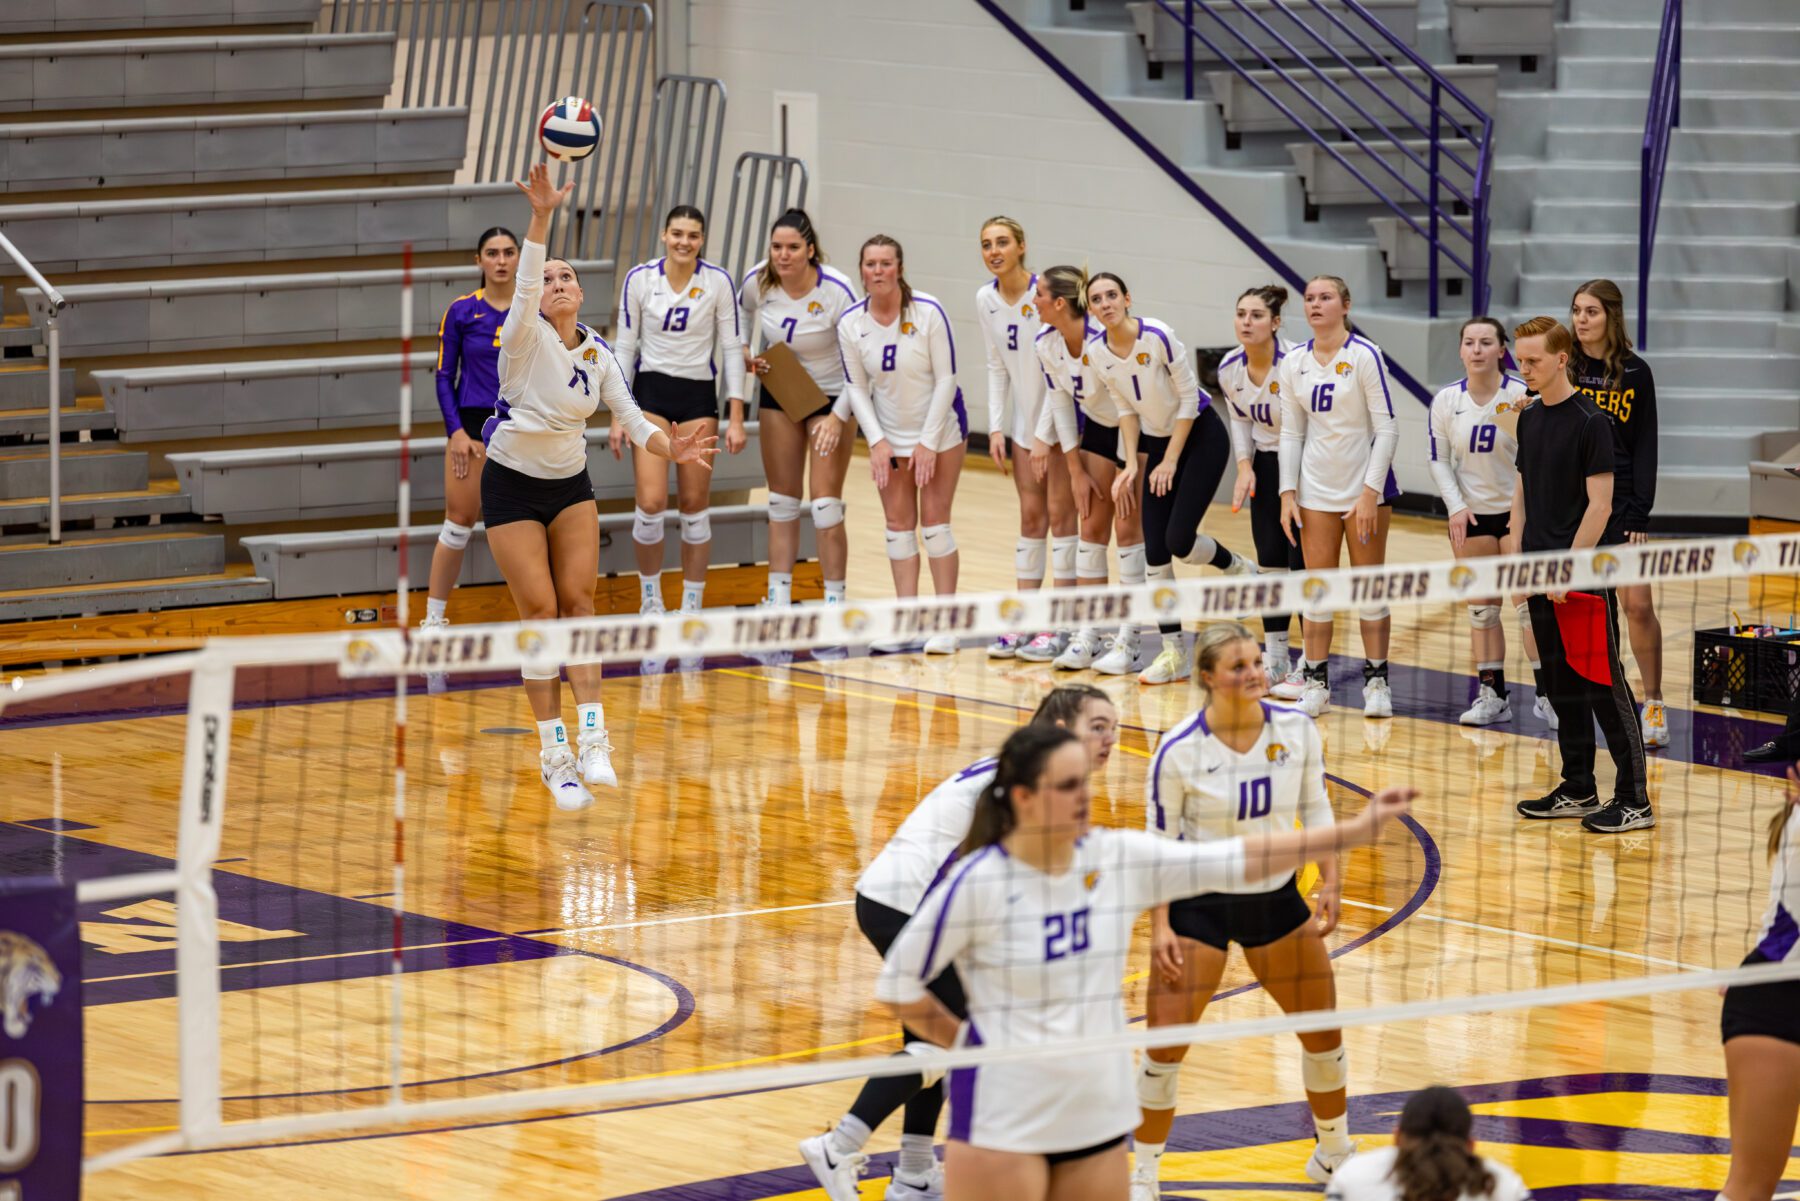 The women's volleyball team watches as their teammate serves the ball.